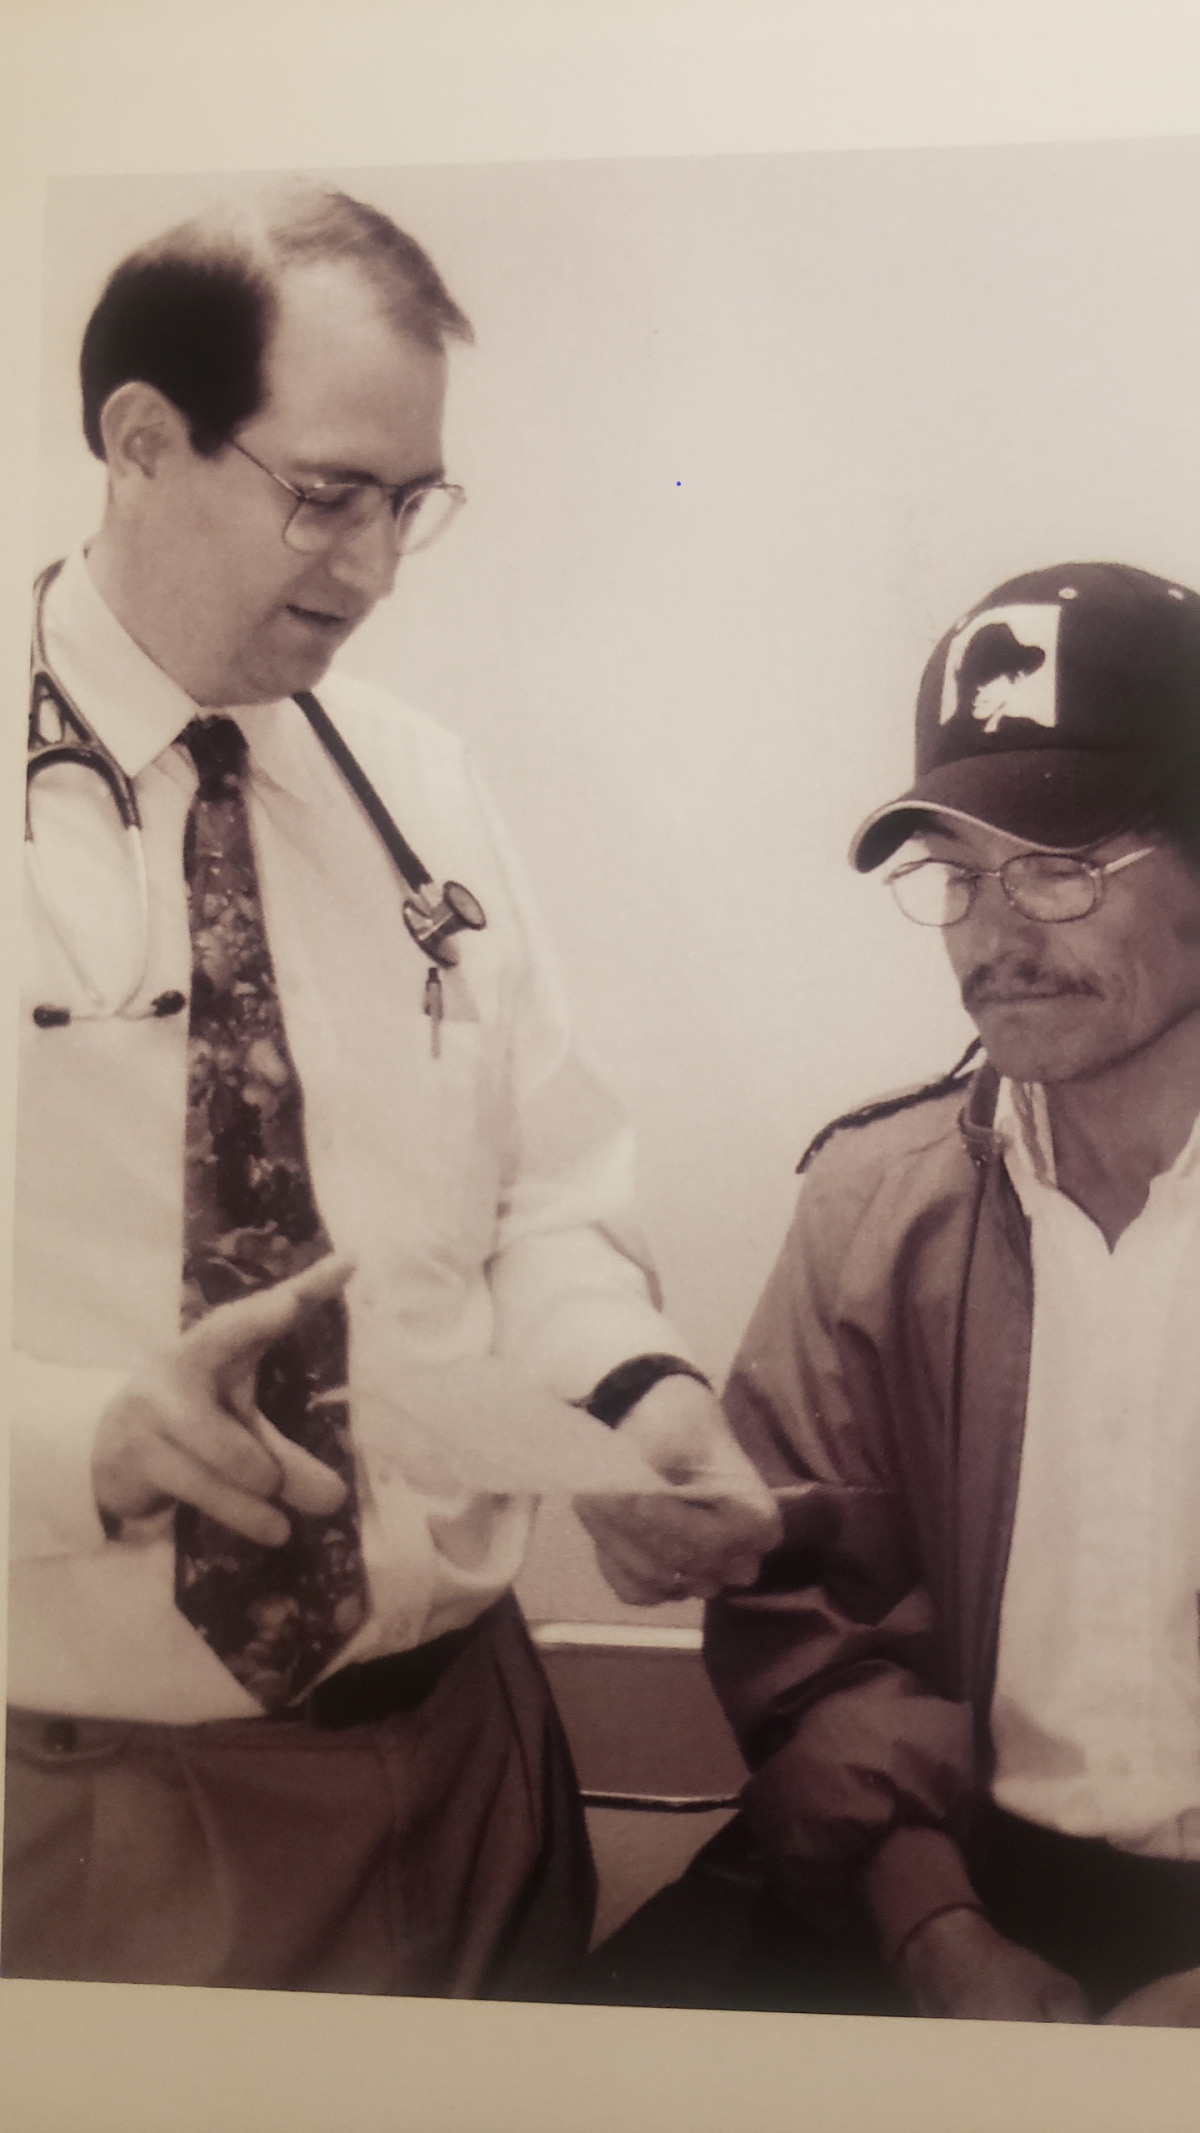 Dr. Moore stands next to a patient holding a piece of paper